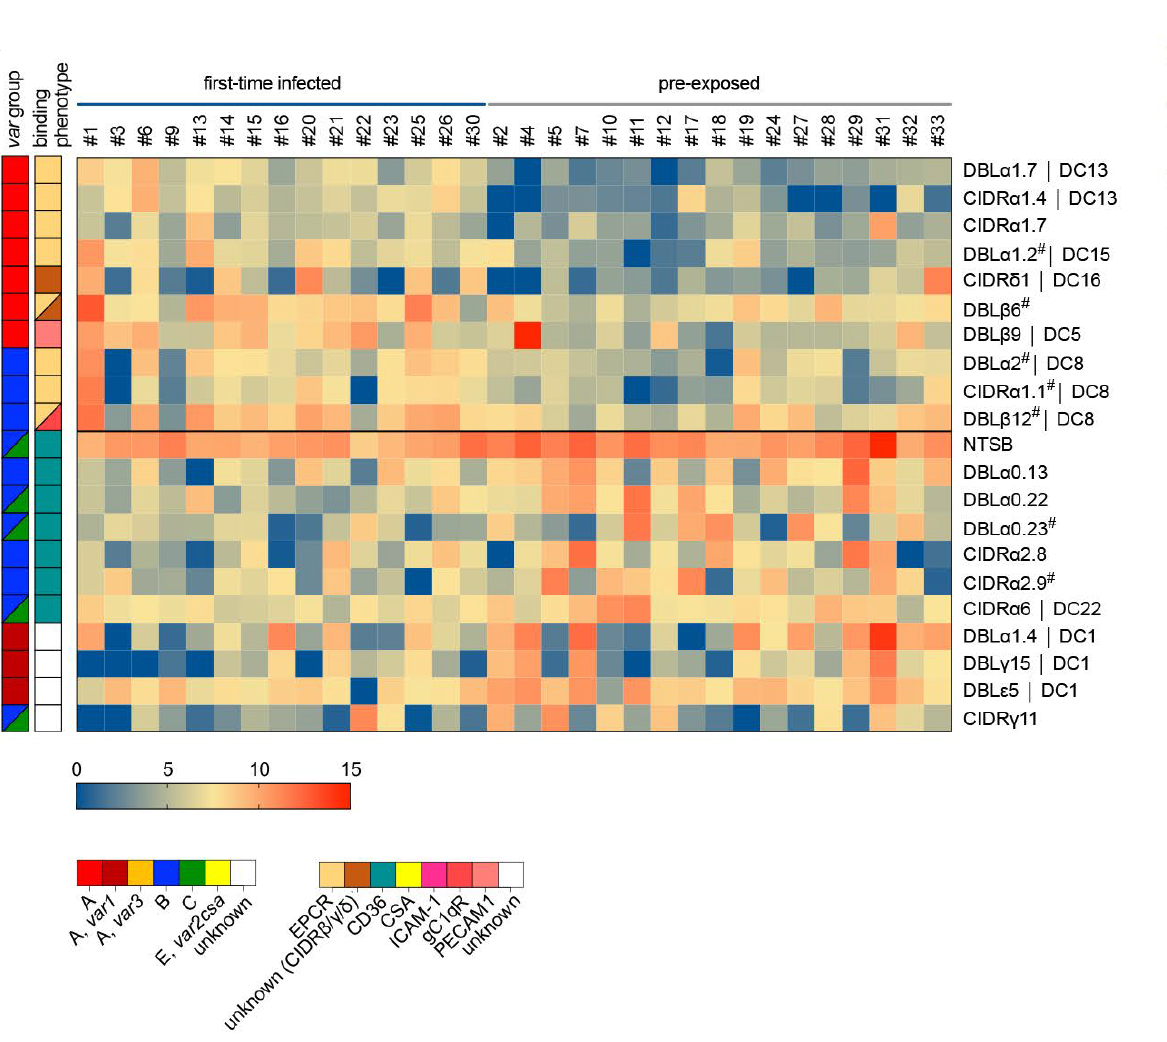 Heat map showing expression diefferences of PfEMP1 domains